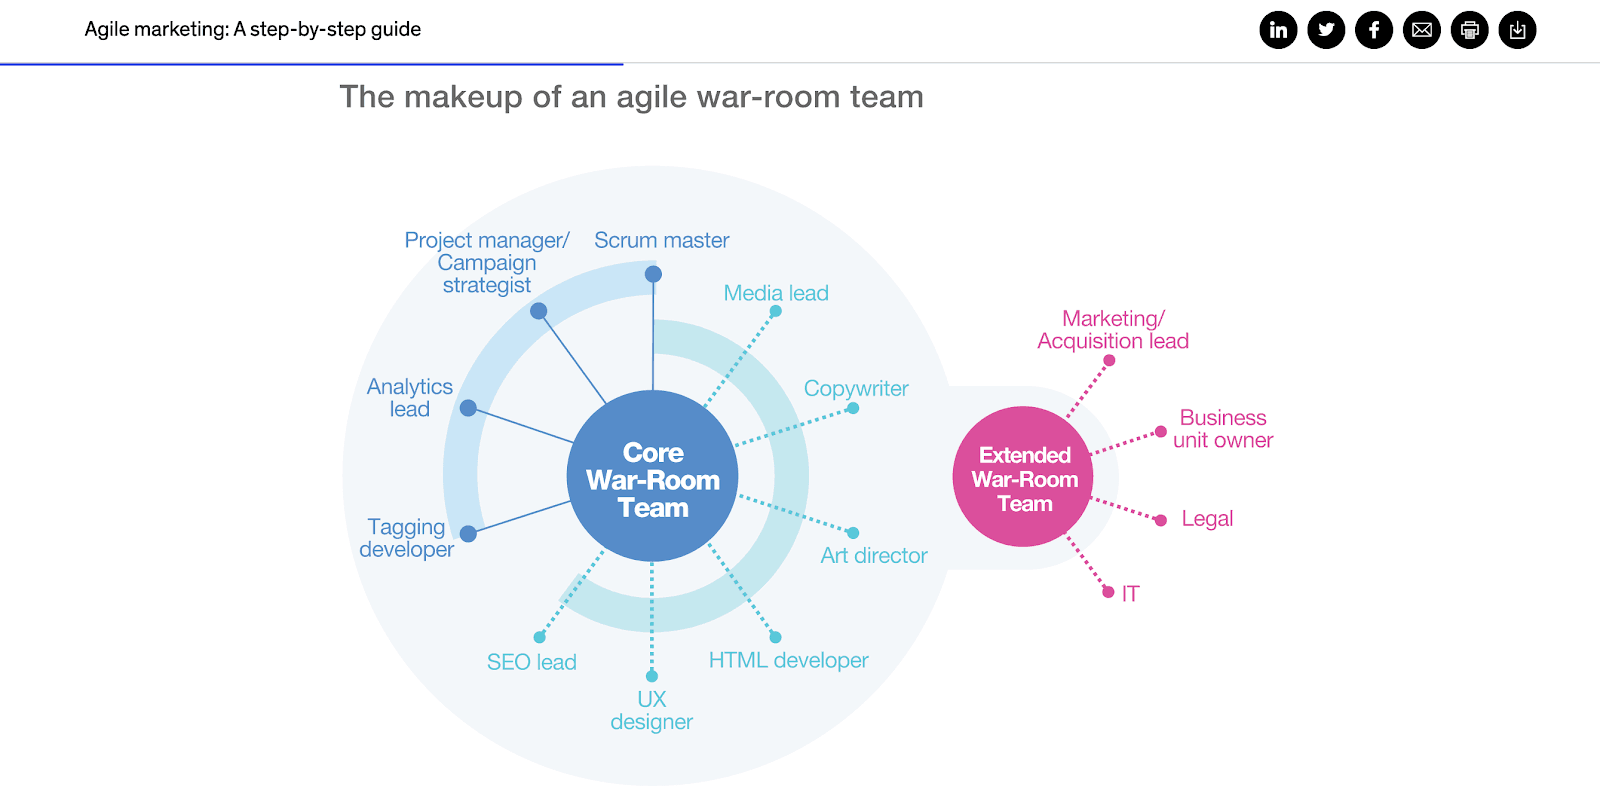 McKinsey Agile Marketing step-by-step guide